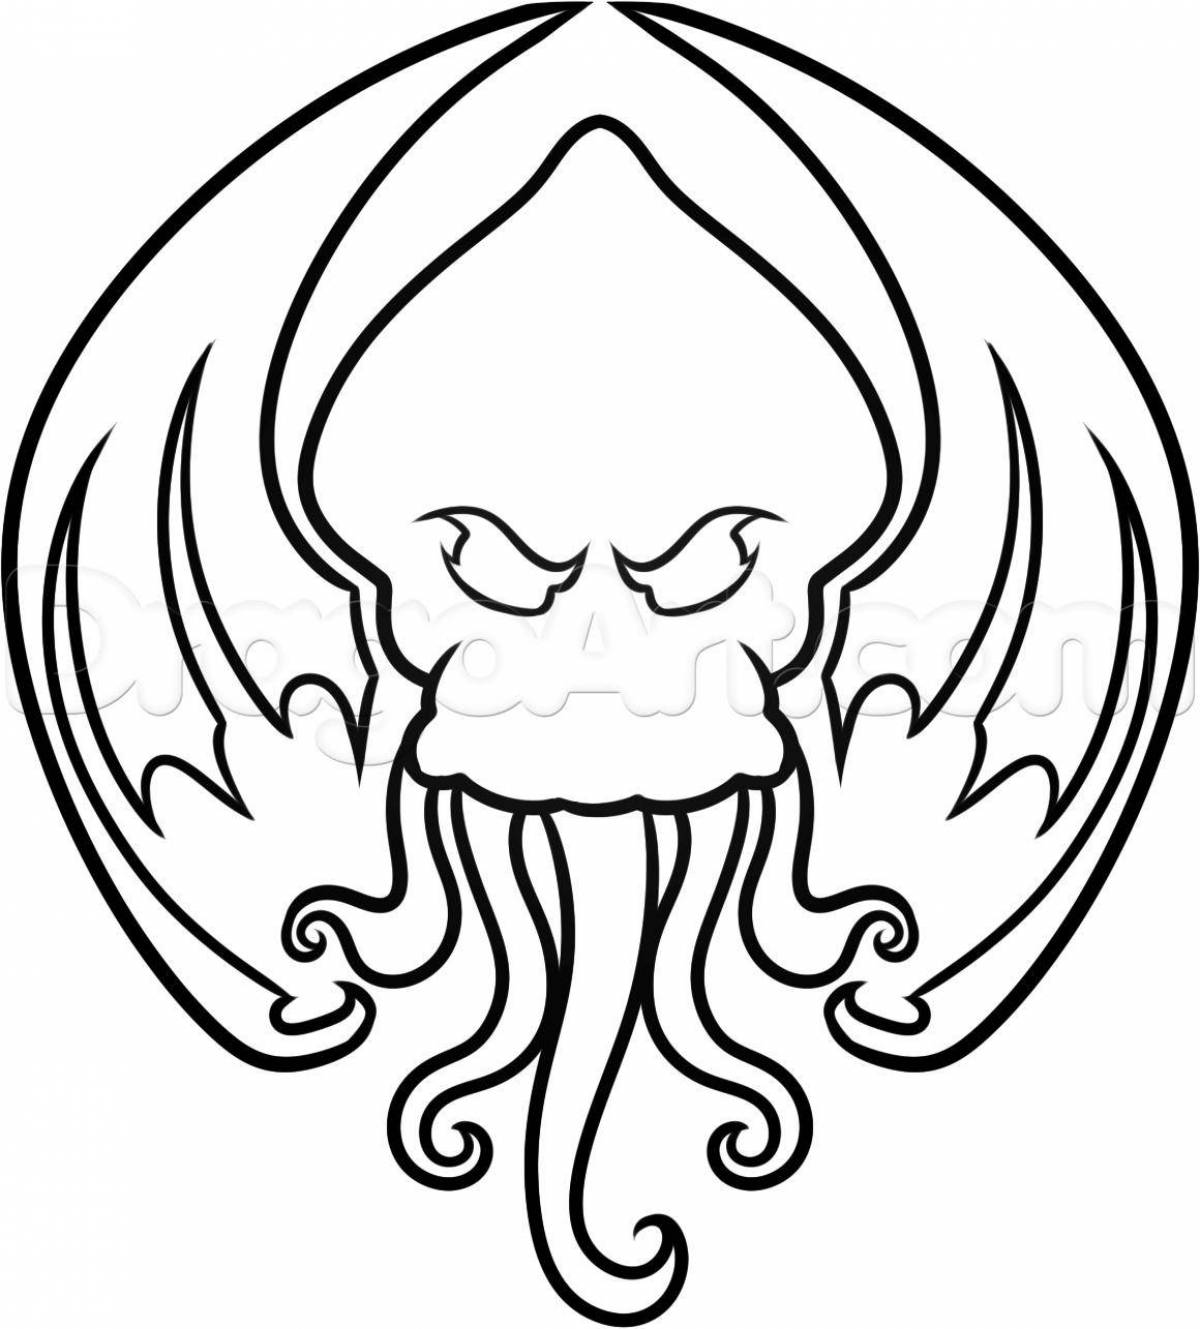 Great coloring of cthulhu